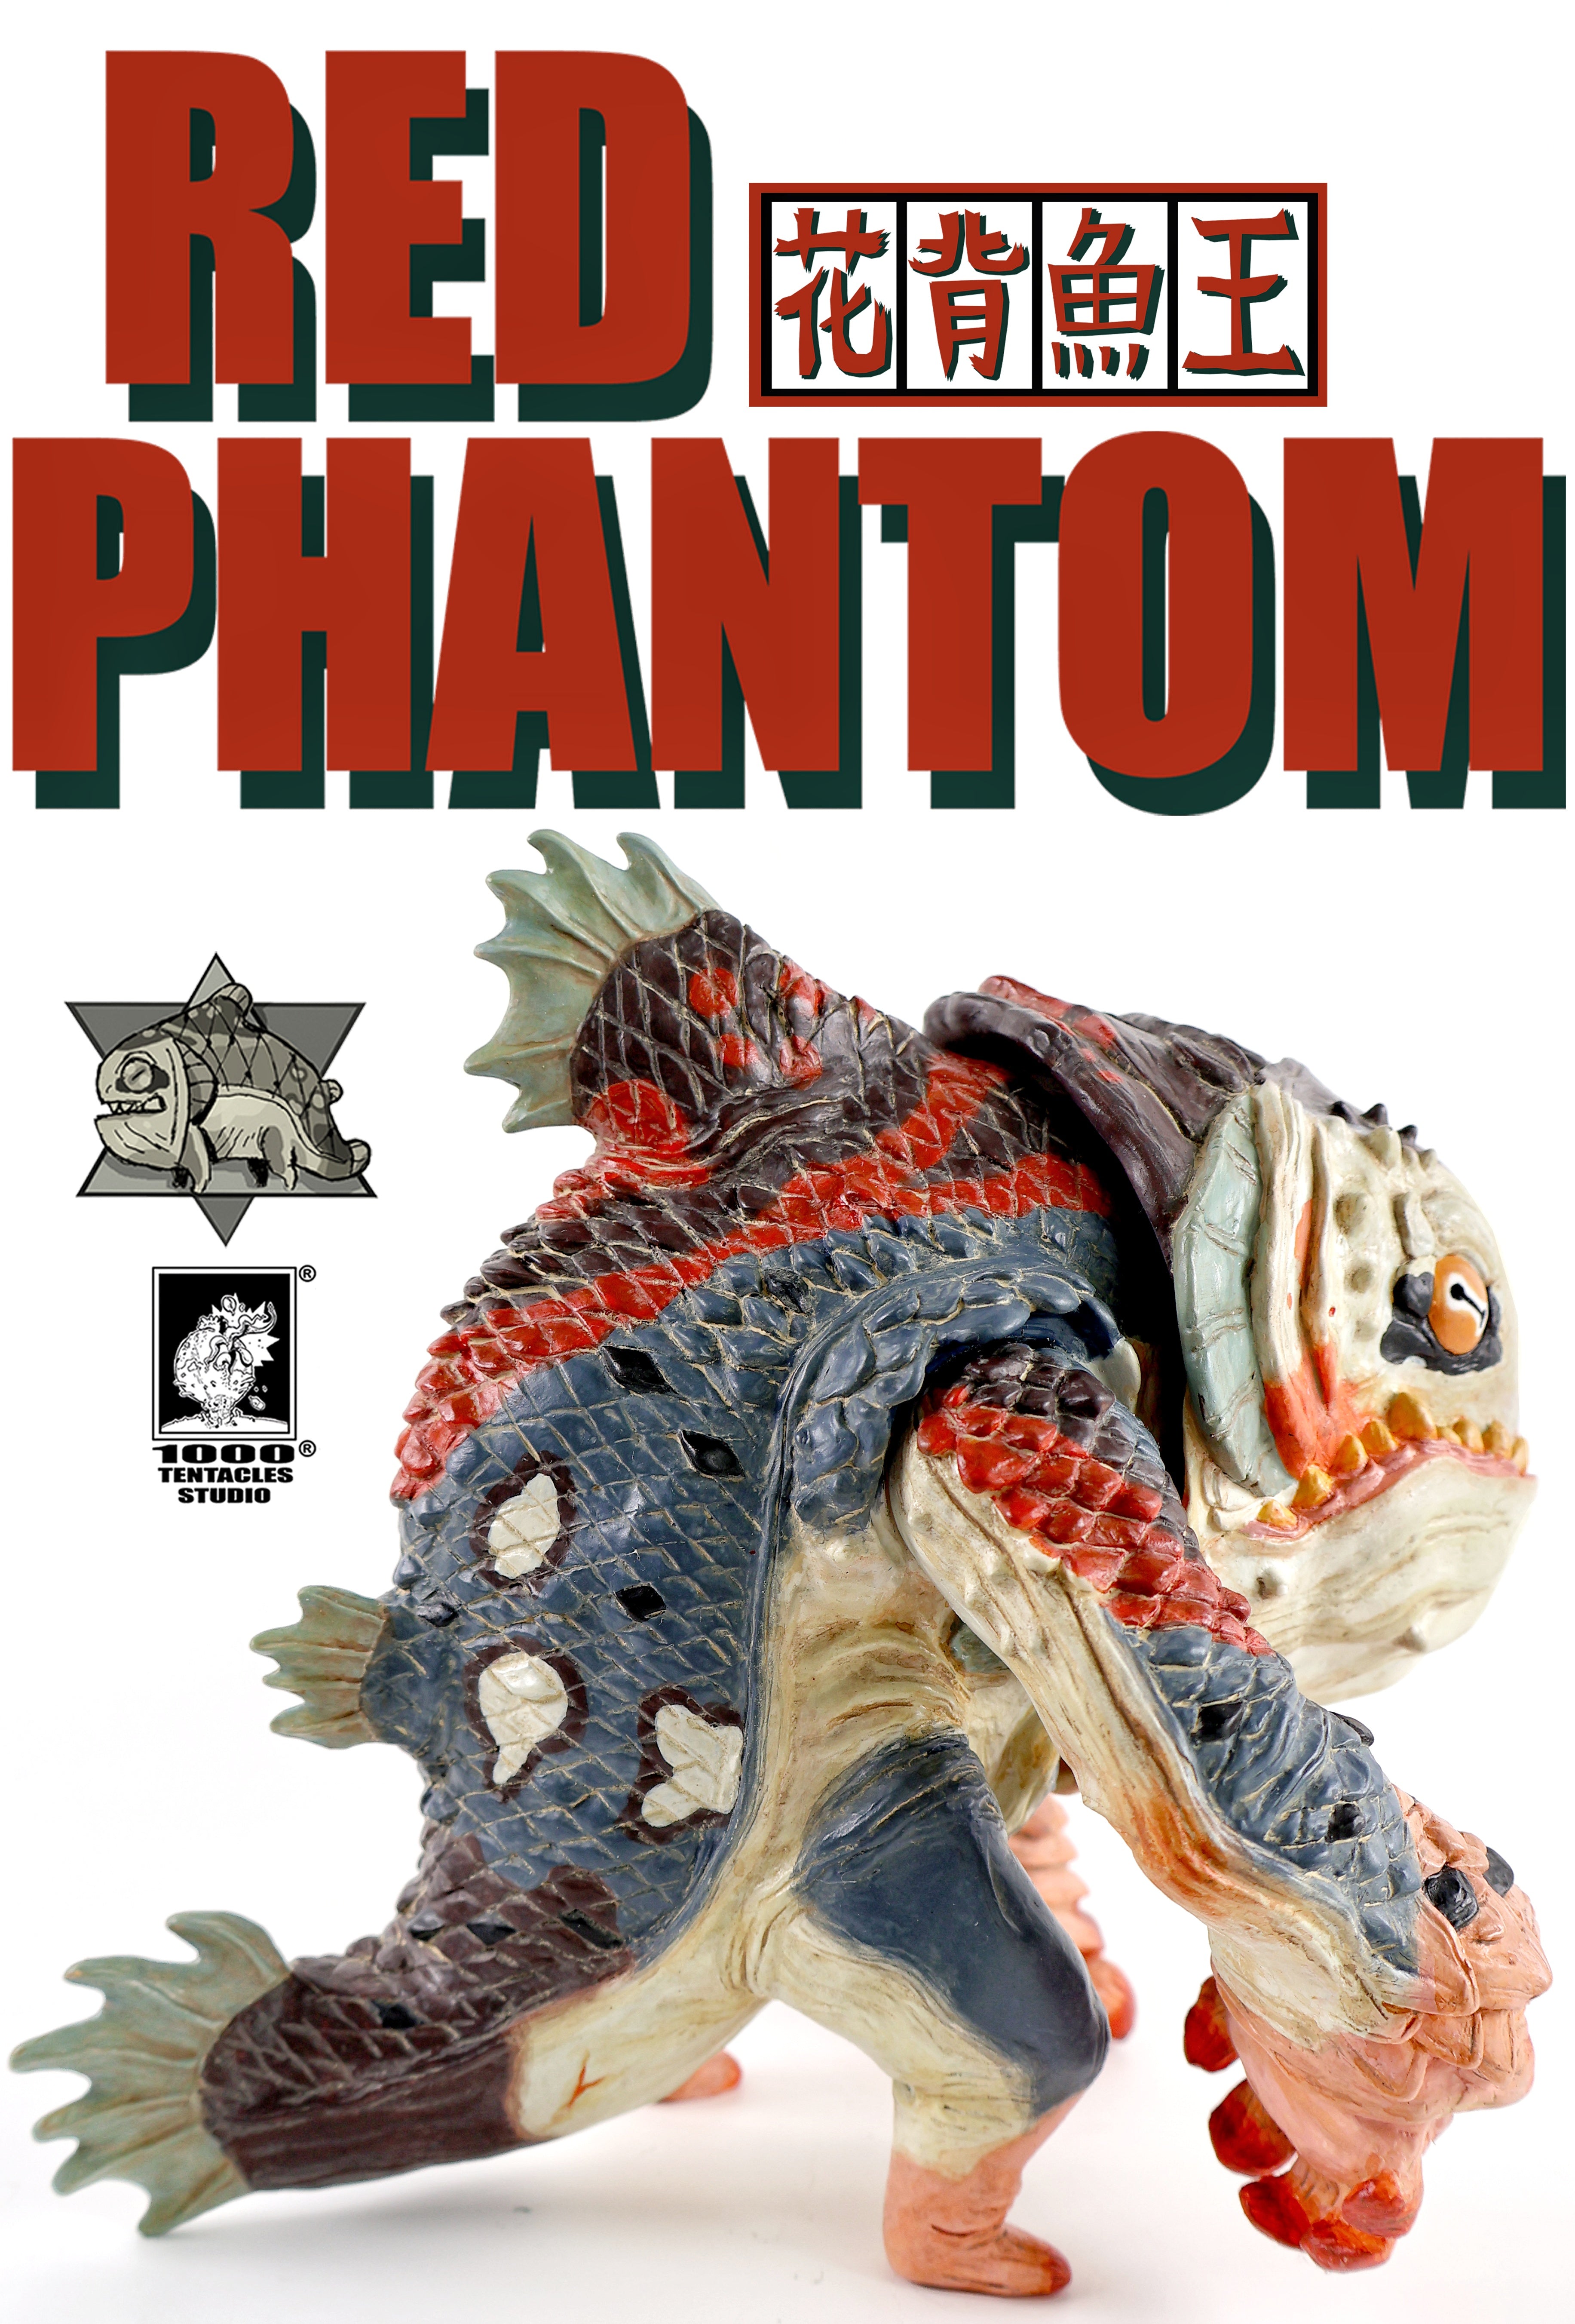 Red Phantom by 1000 Tentacles - Preorder